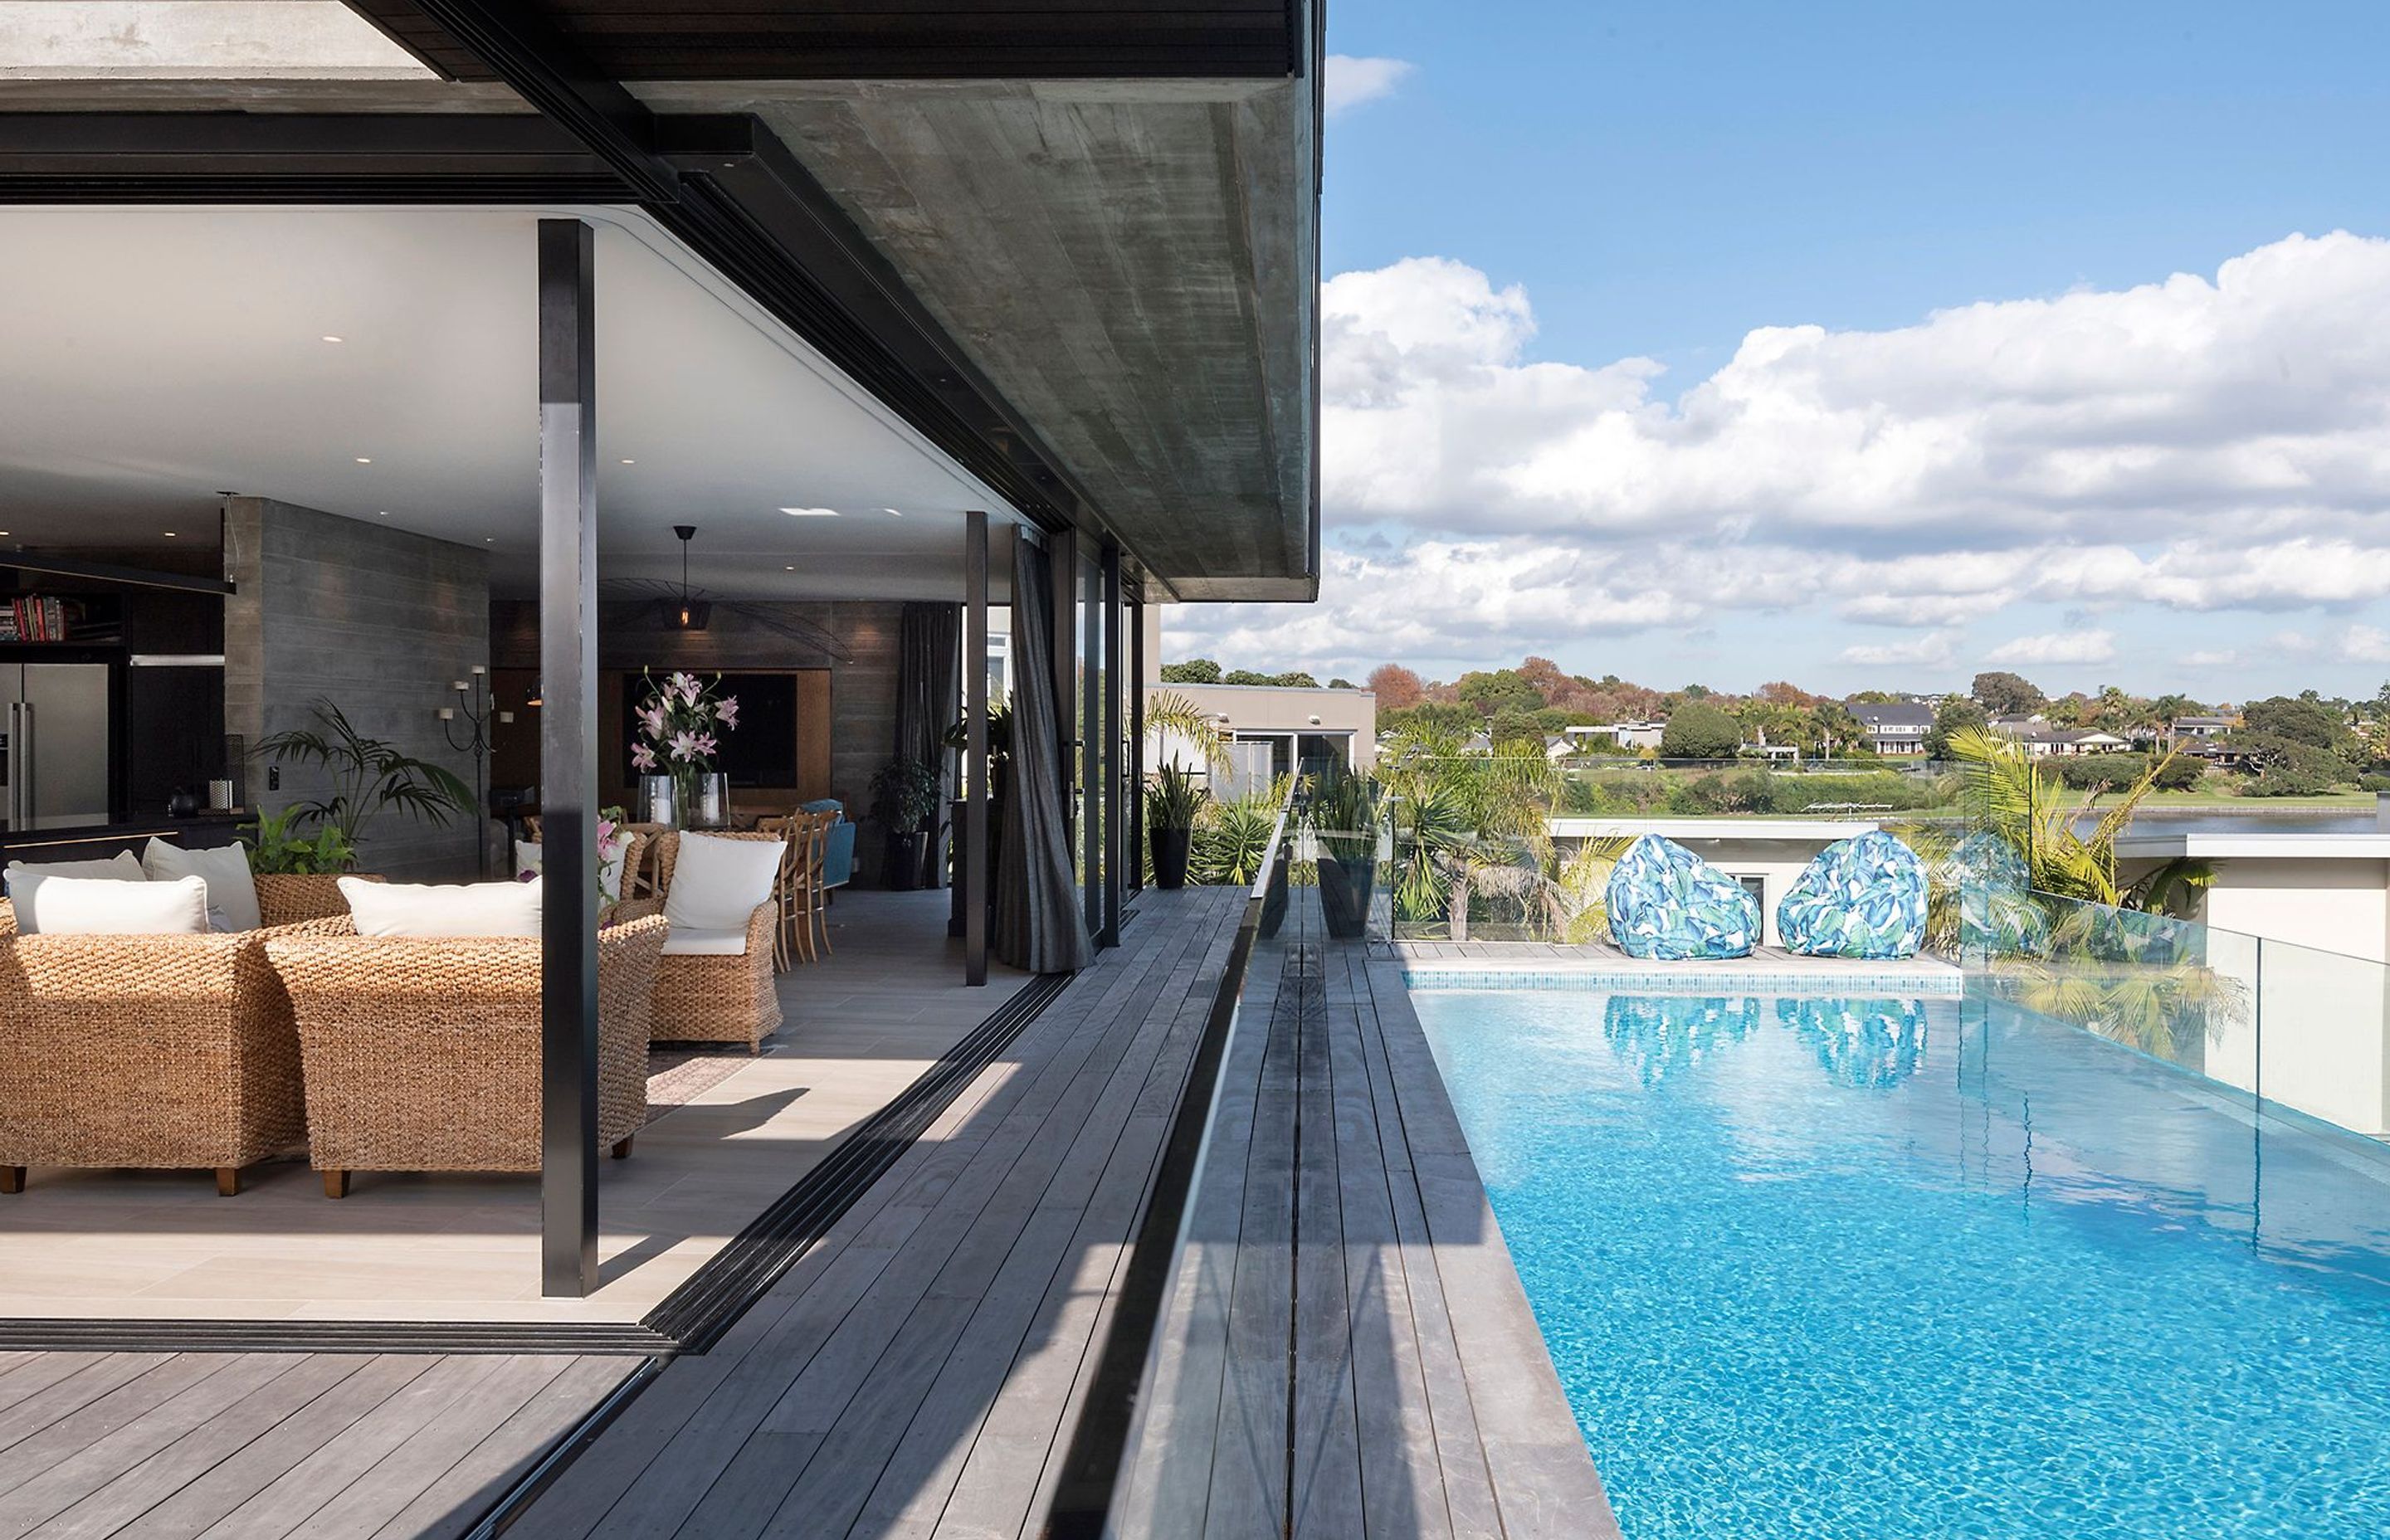 Sliding doors open up the two lounges and dining area on two sides, while a glass balustrade provides a transparent enclosure for the swimming pool.